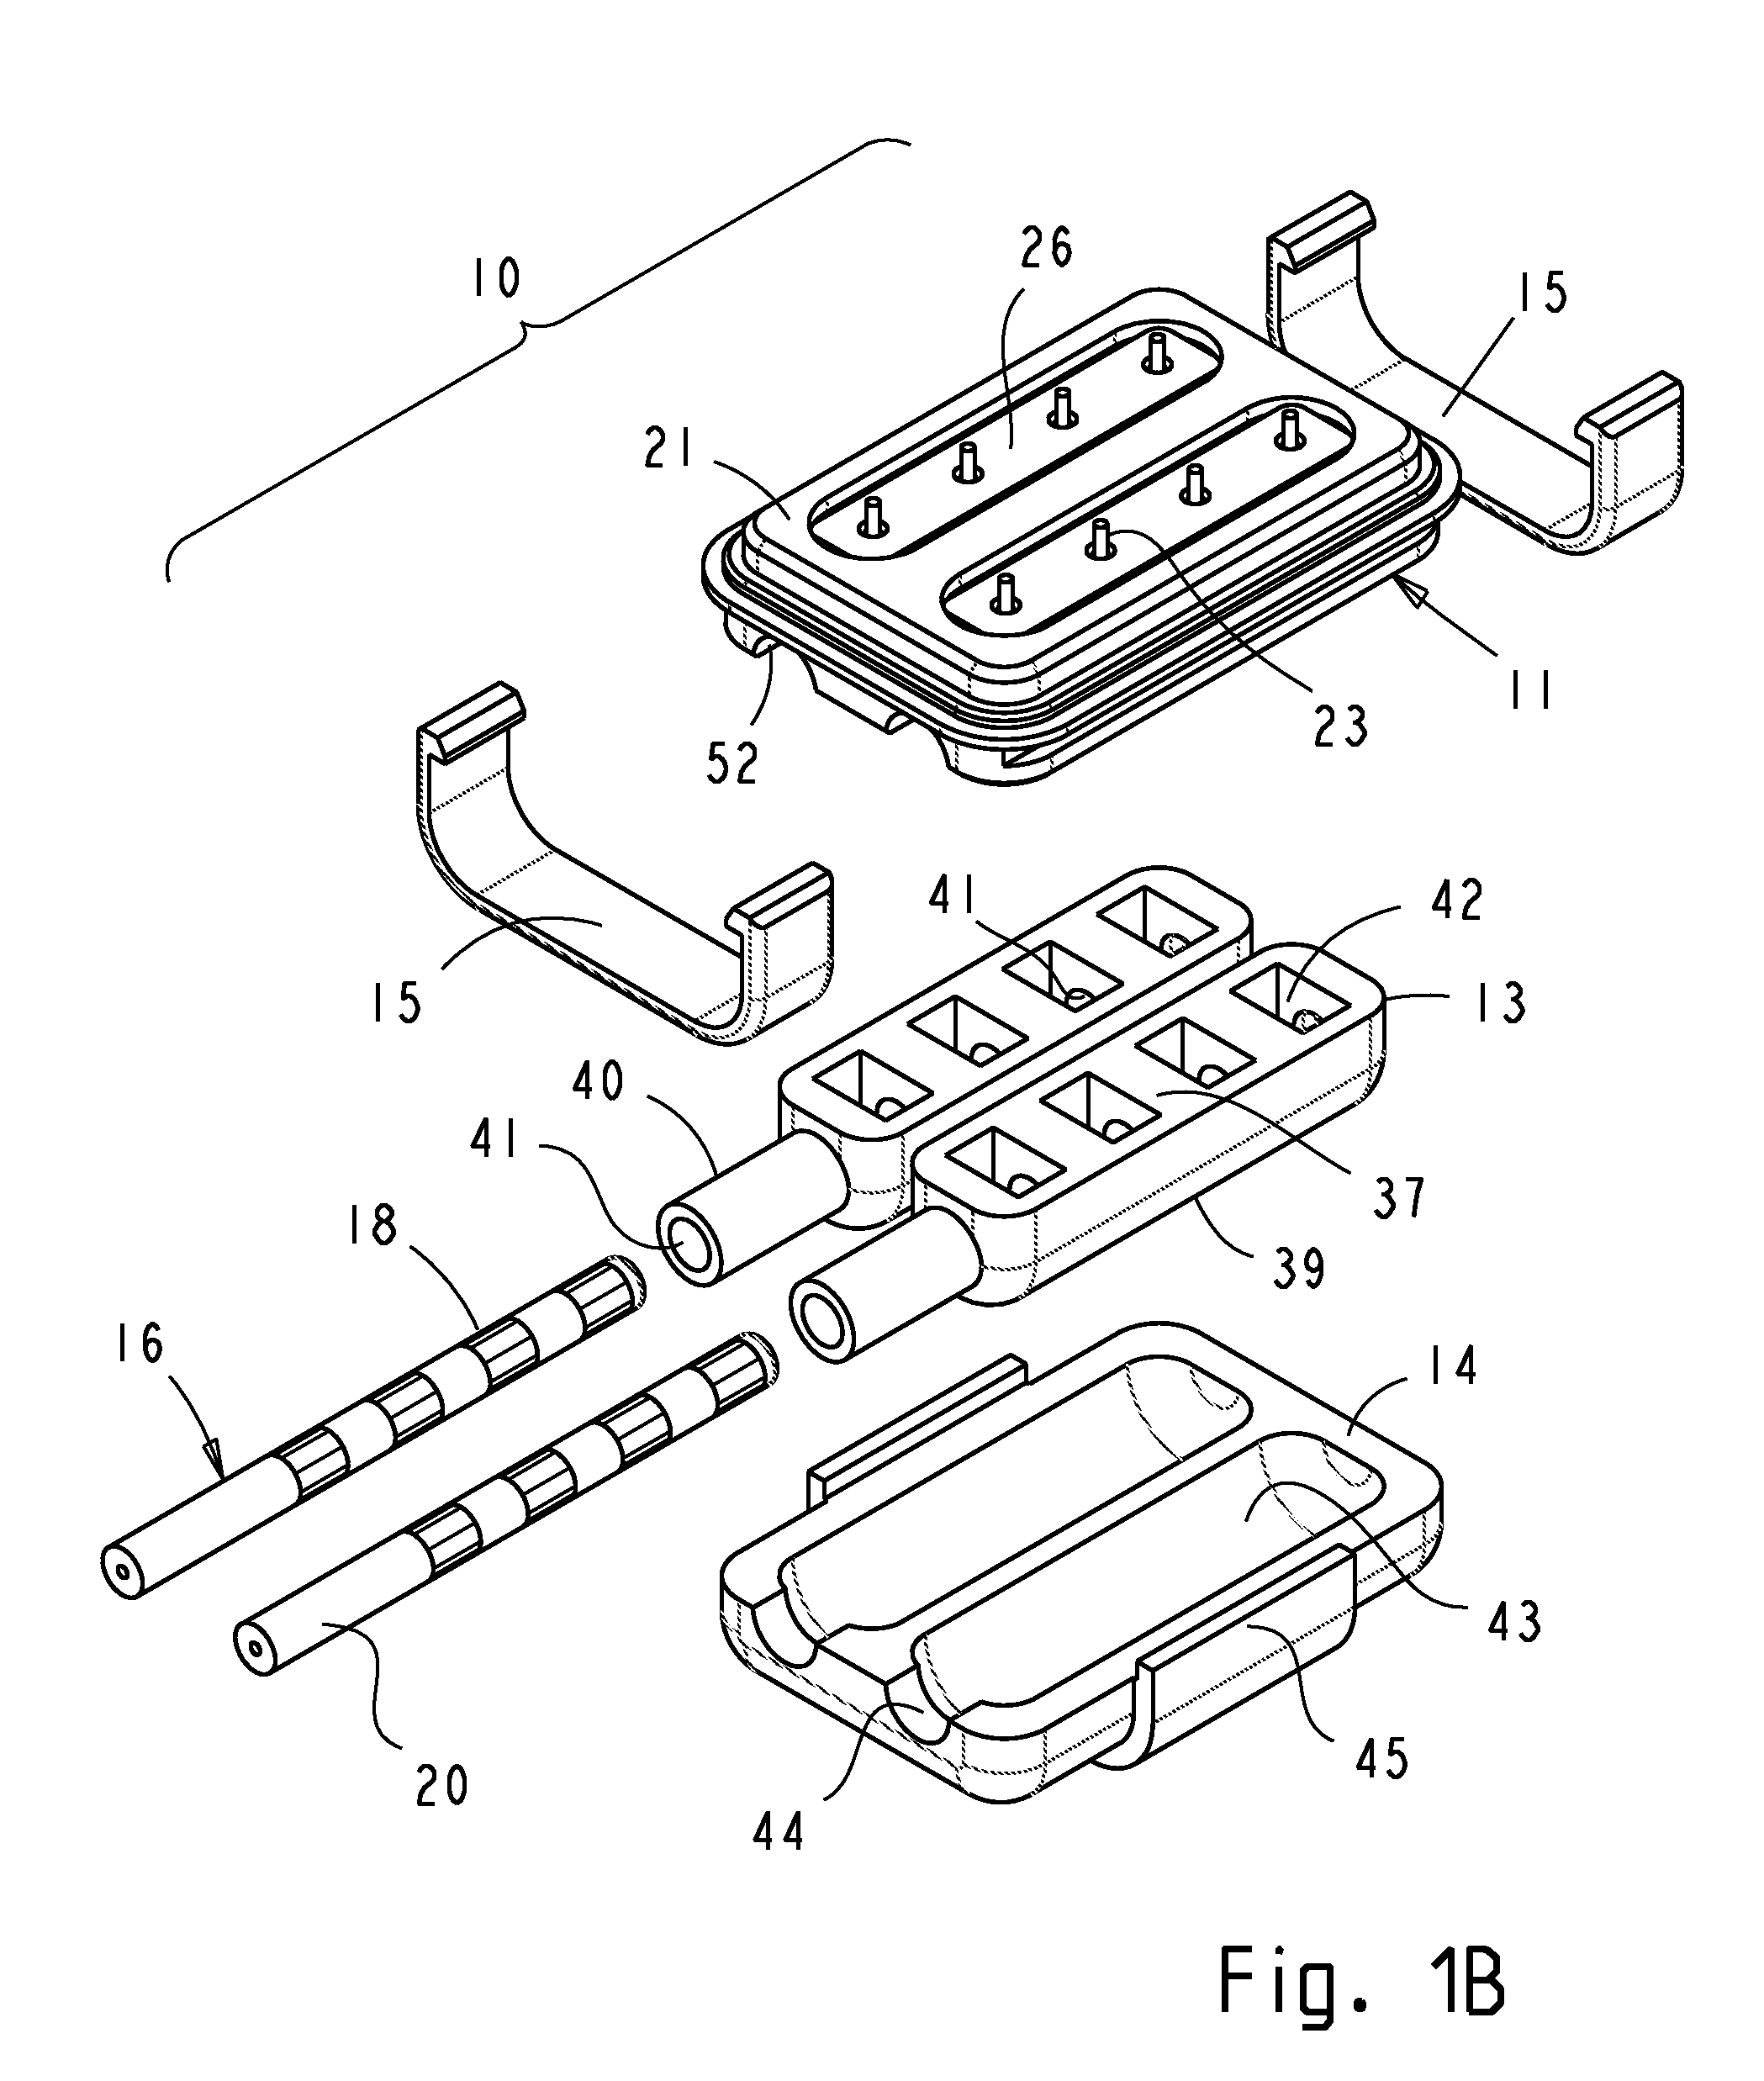 Implantable connector with protected contacts